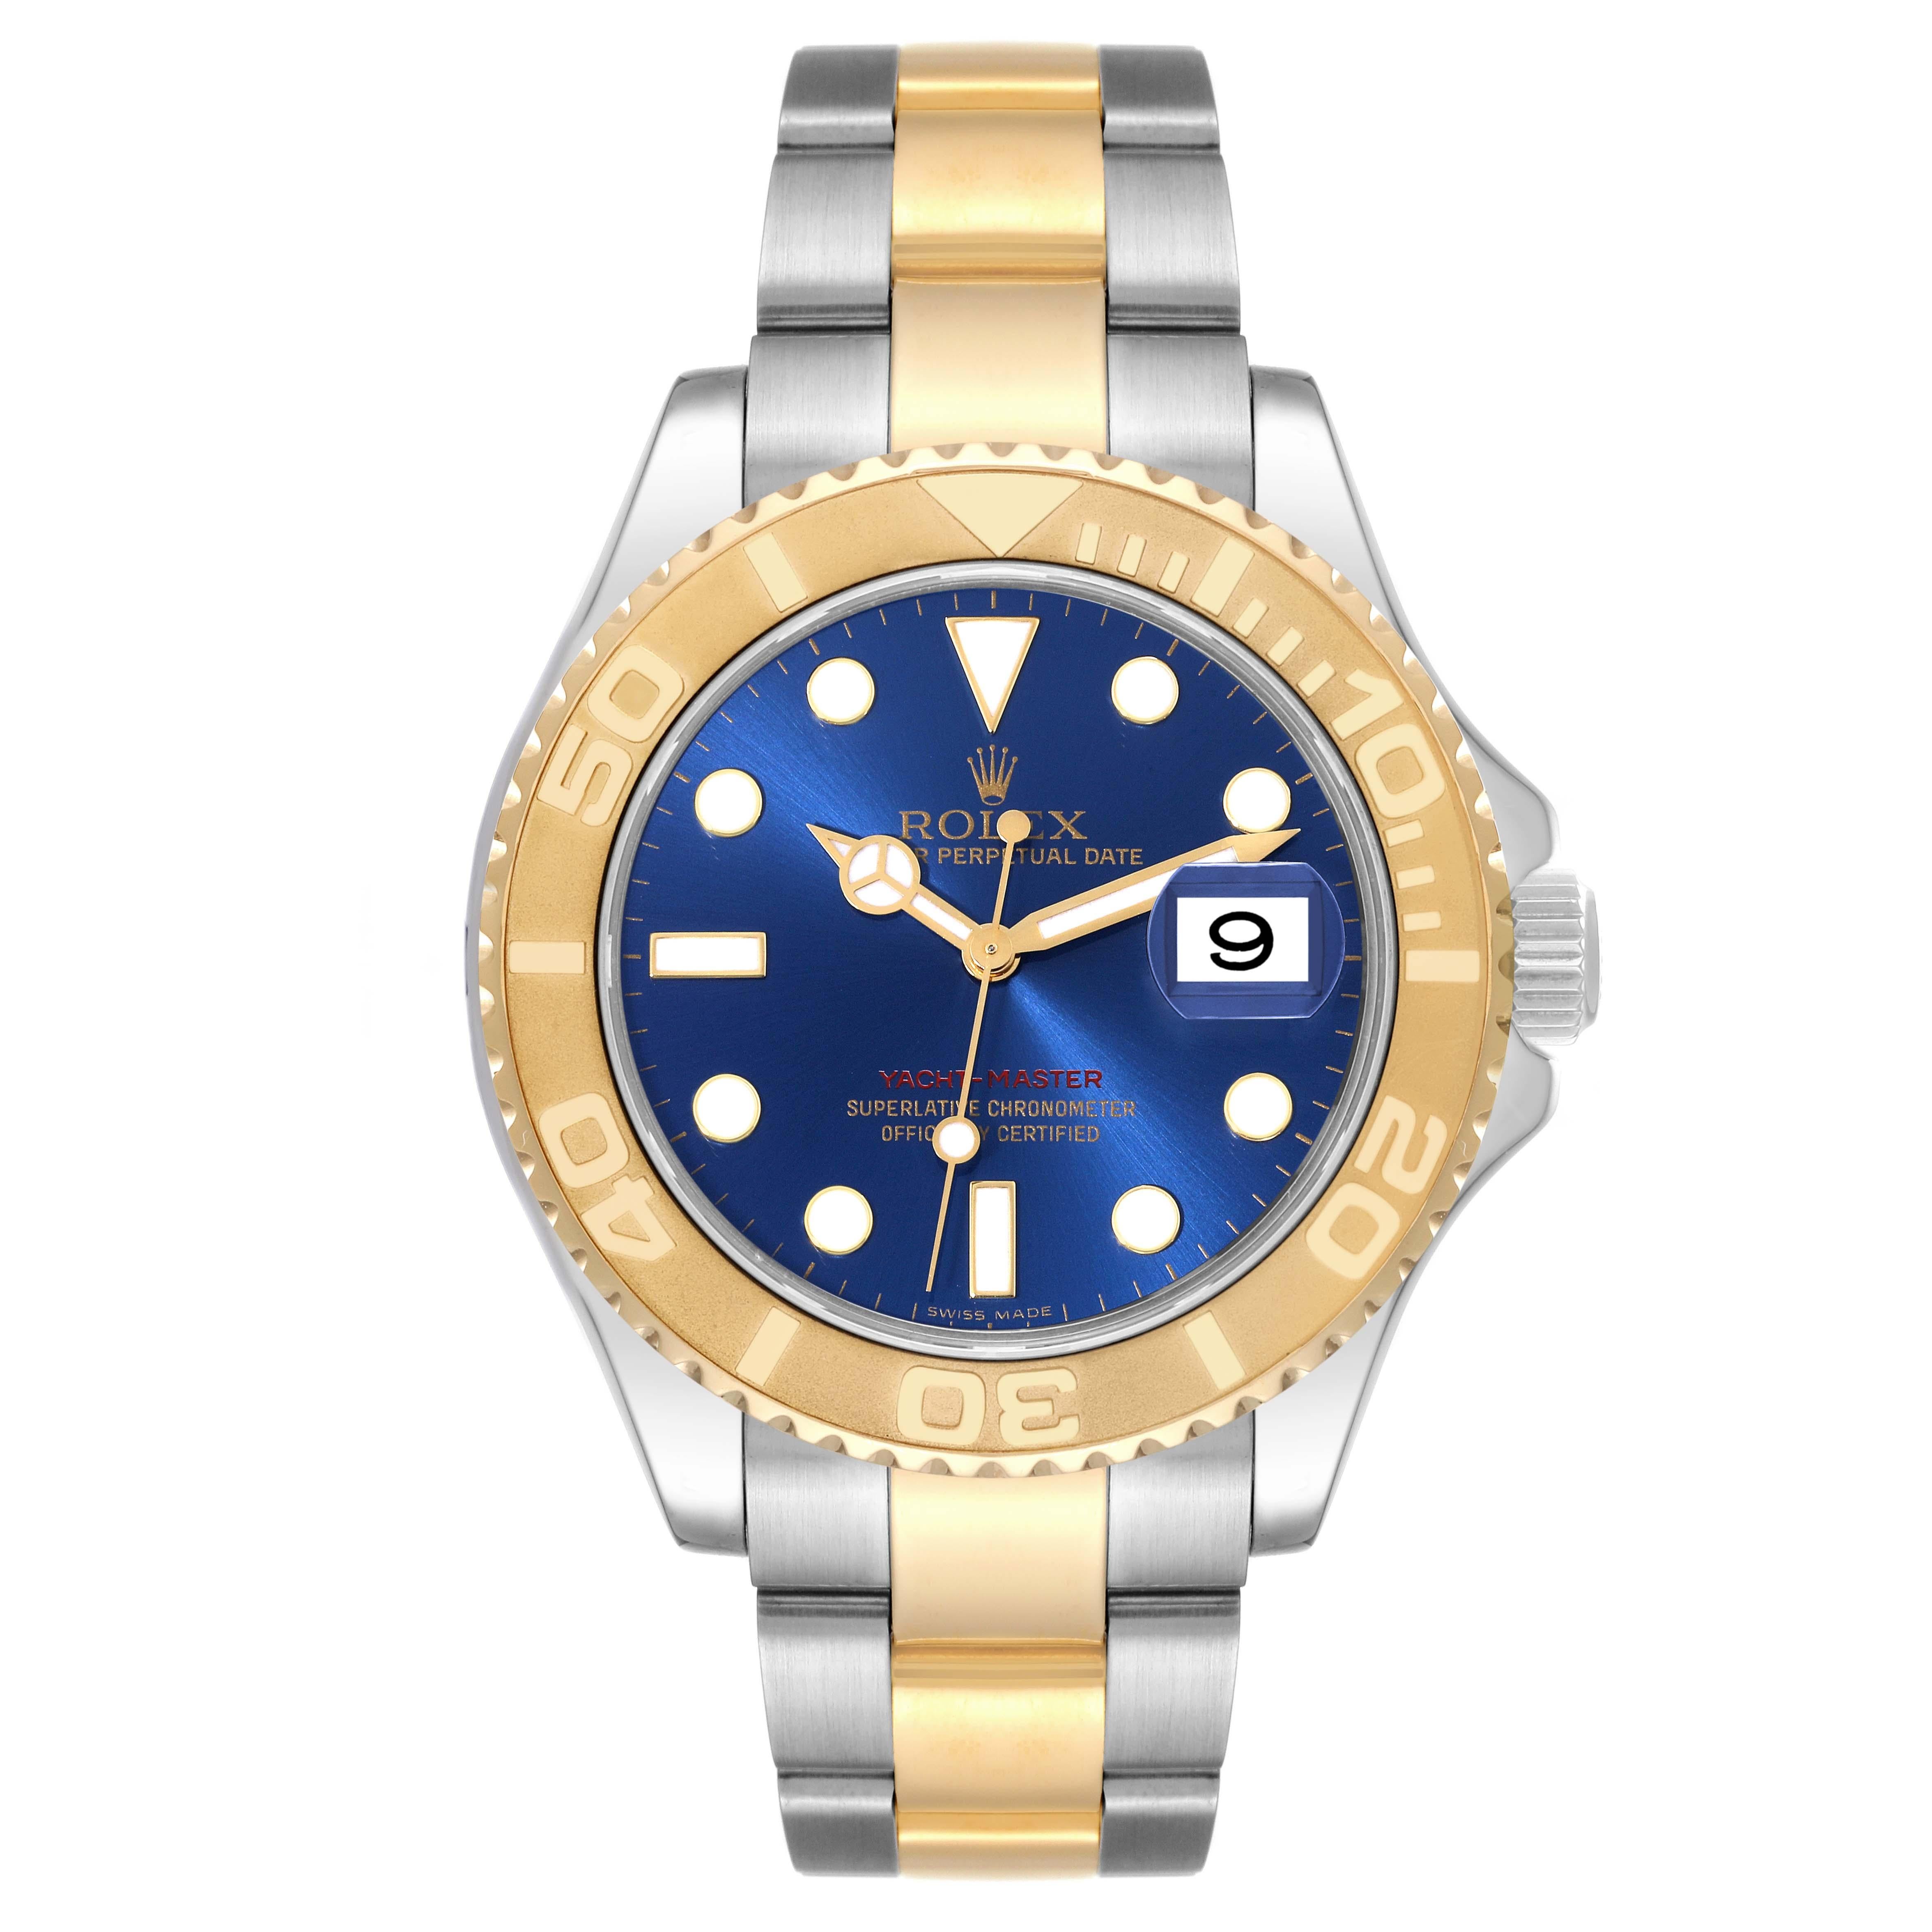 Rolex Yachtmaster 40mm Steel Yellow Gold Blue Dial Mens Watch 16623. Officially certified chronometer self-winding movement. Stainless steel case 40 mm in diameter. Rolex logo on a crown. 18k yellow gold special time-lapse unidirectional rotating